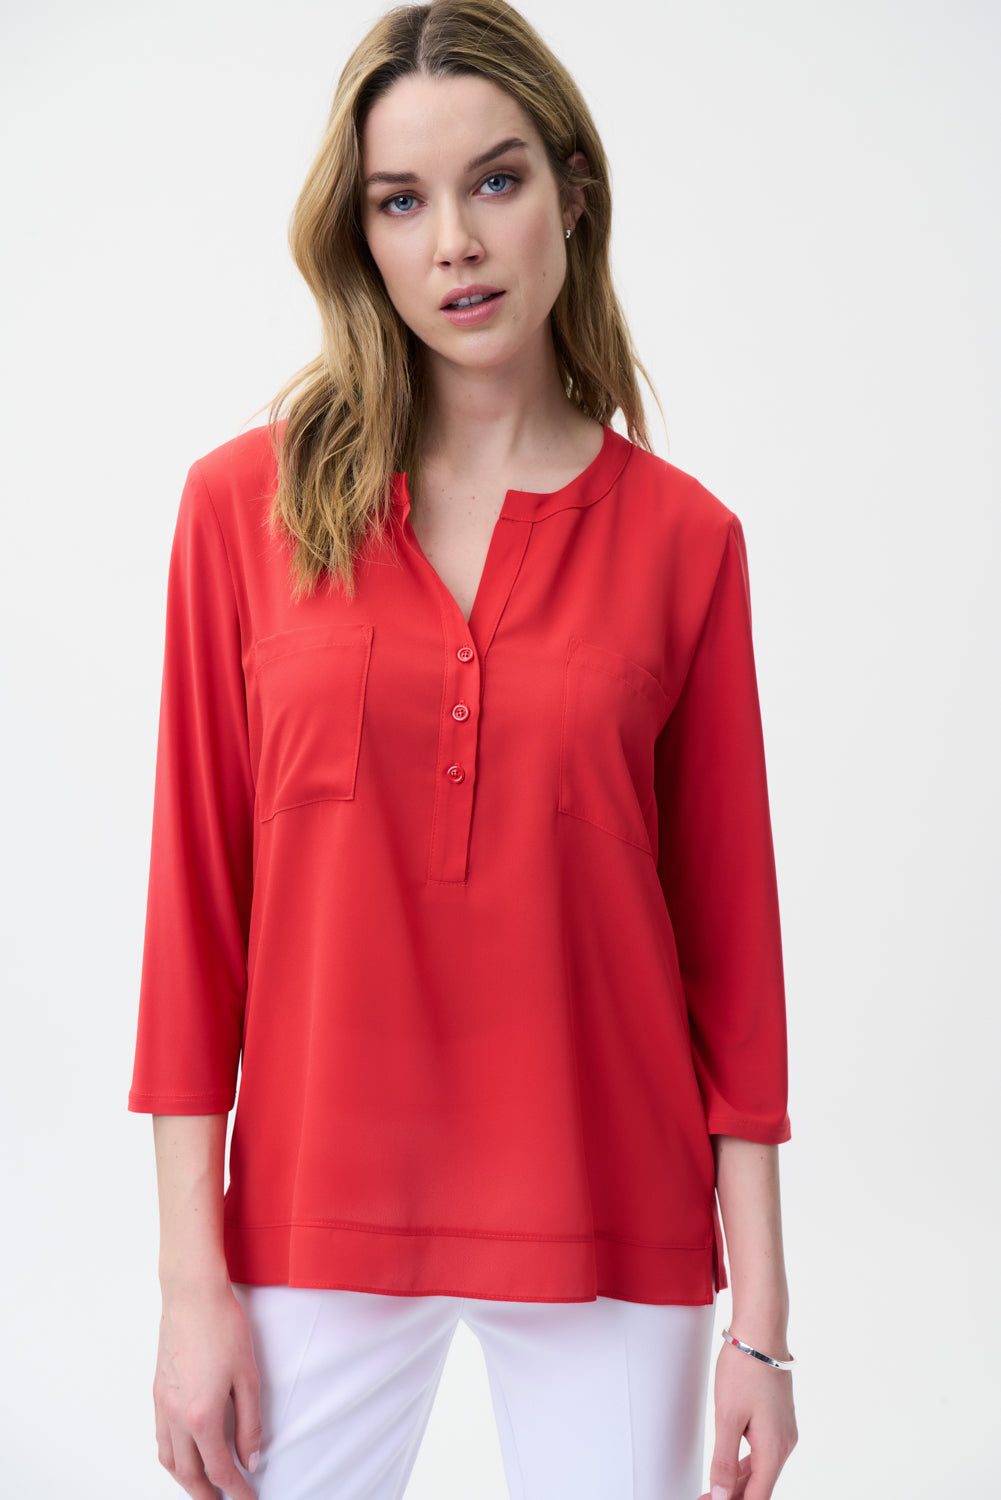 Joseph Ribkoff Lacquer Red Henley Top Style 221027